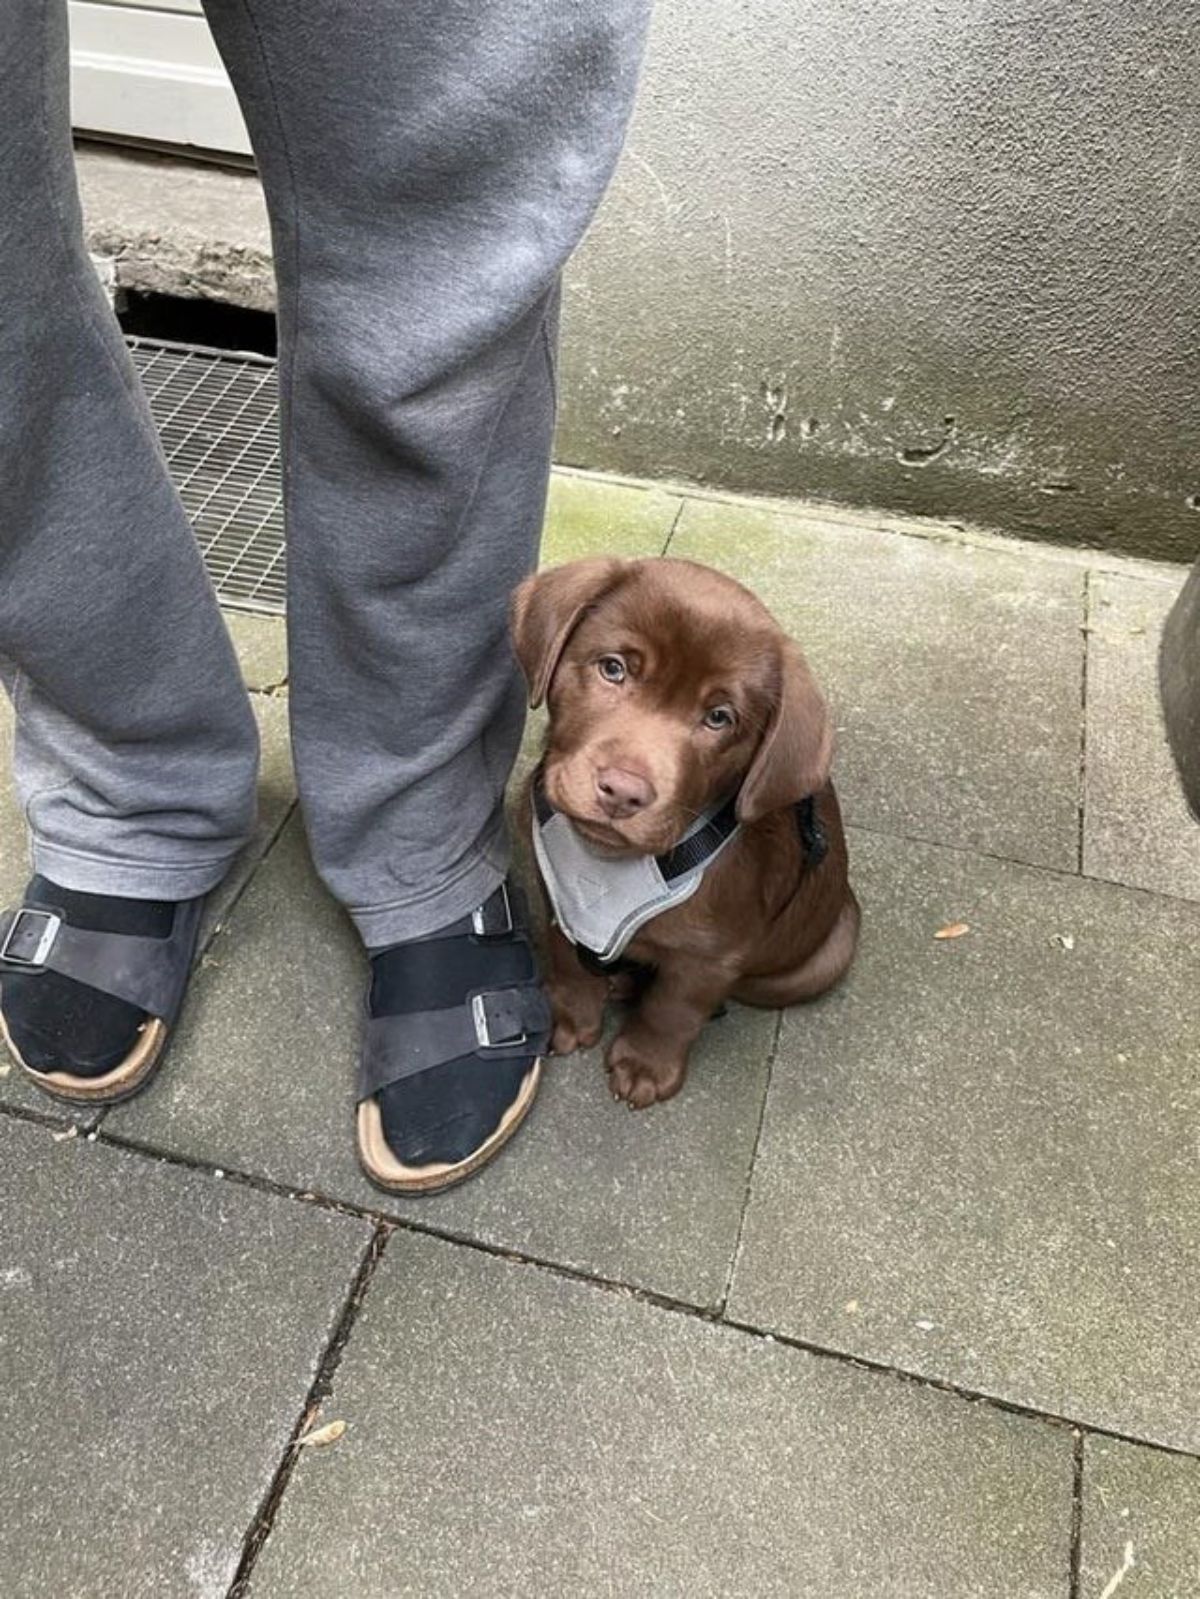 a brown labrador puppy with a white bandana sitting on the pavement next to someone's legs